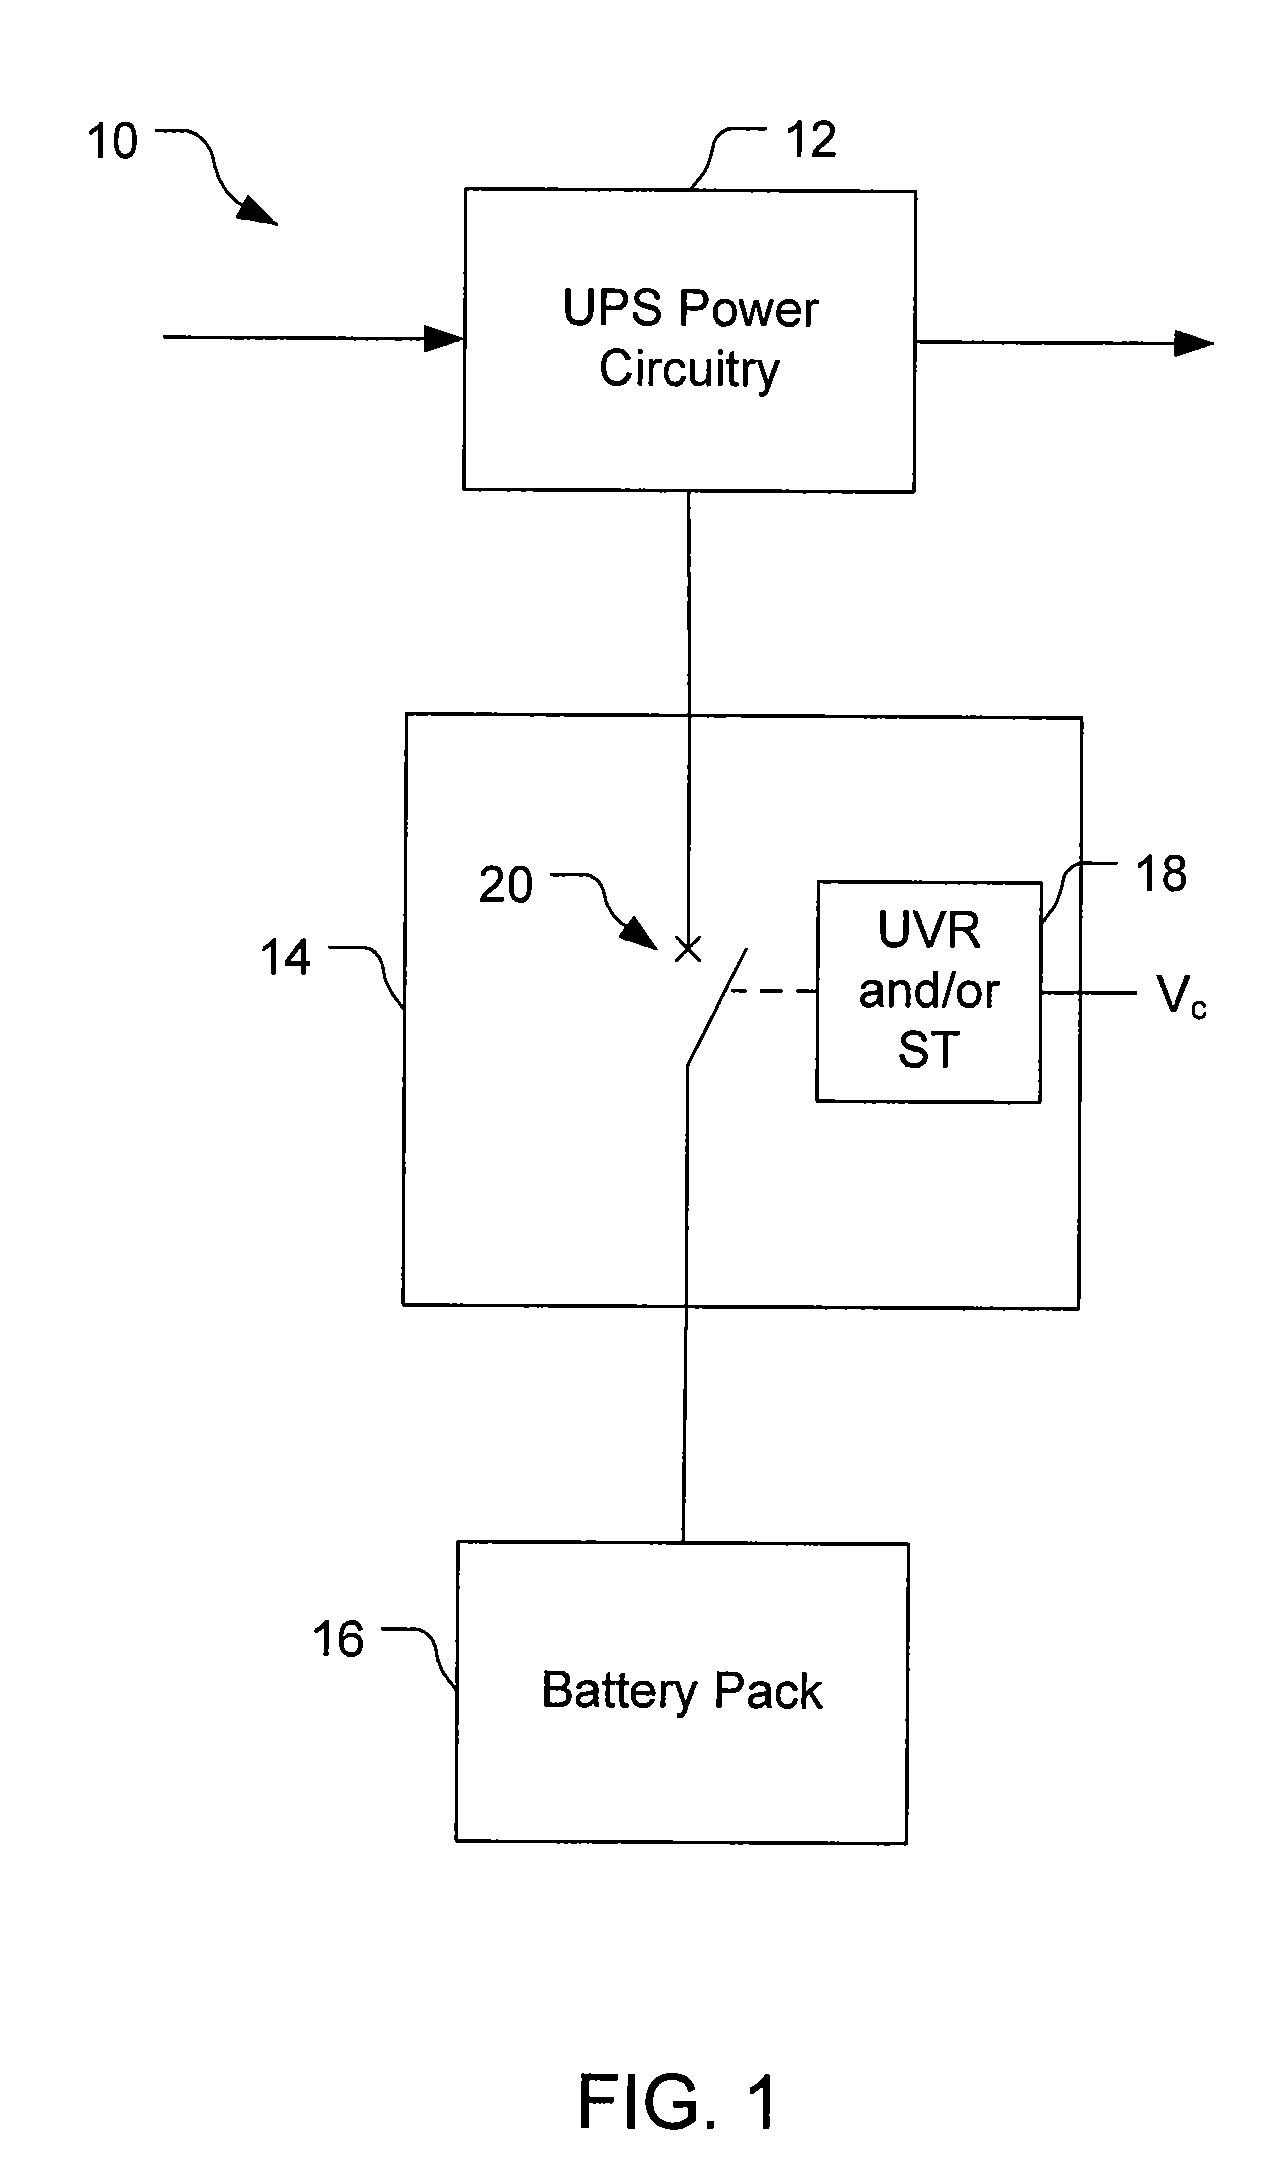 Automatic battery reconnection